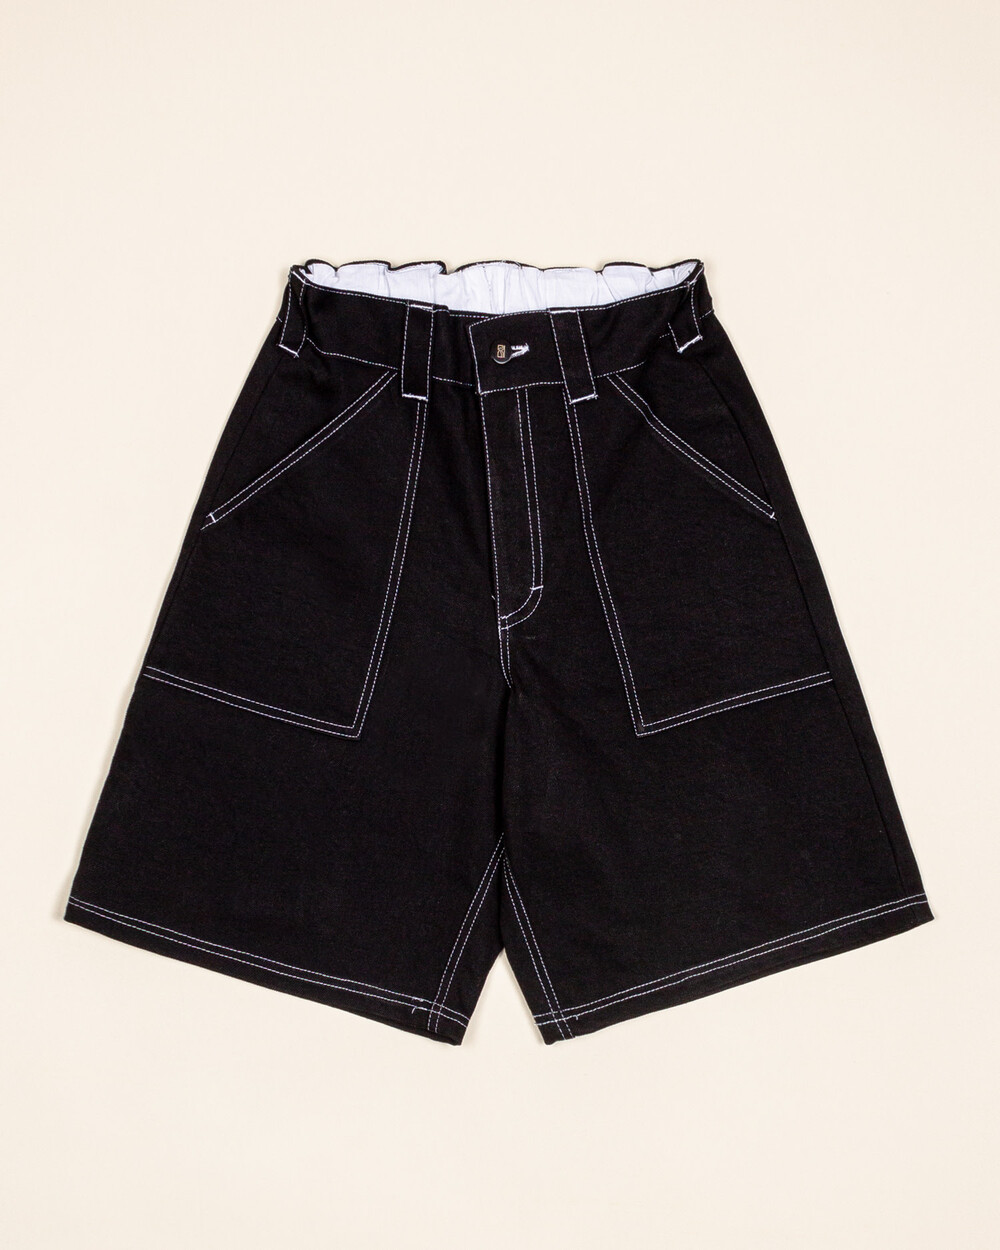 Poetic Collective Poetic Collective Painter Shorts - Black Denim/White stitching